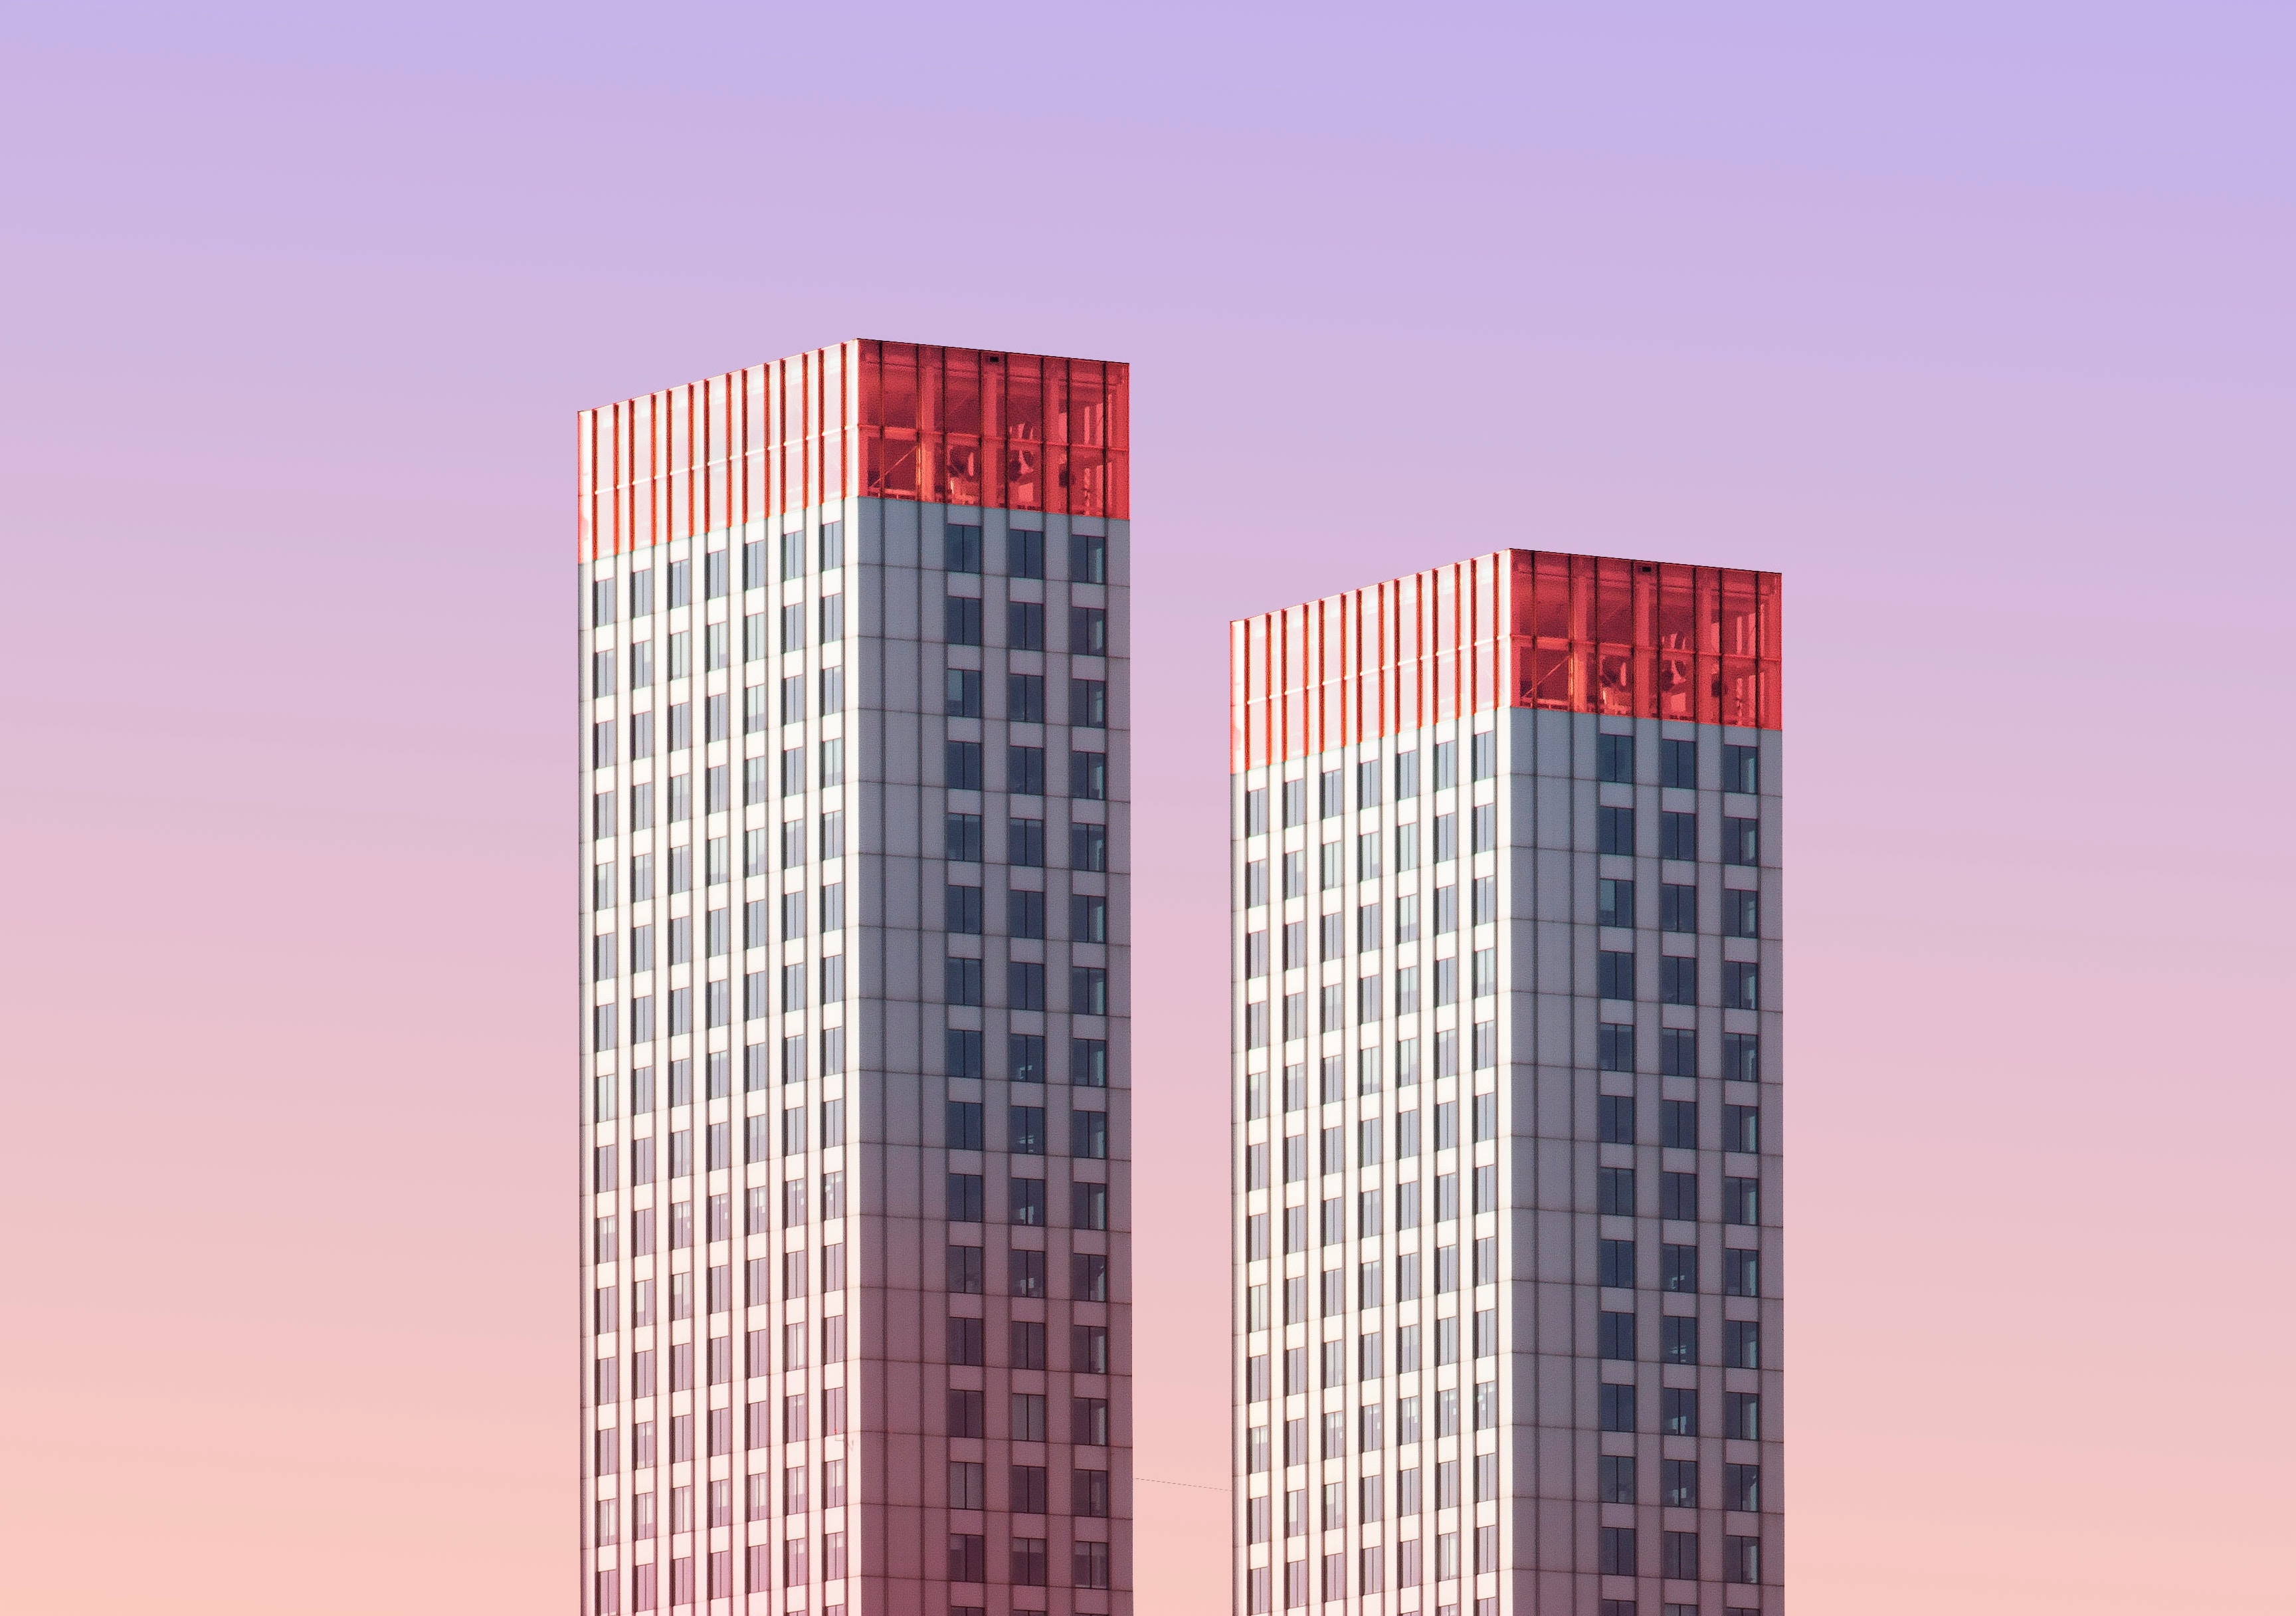 Two skyscrapers against a purple sky